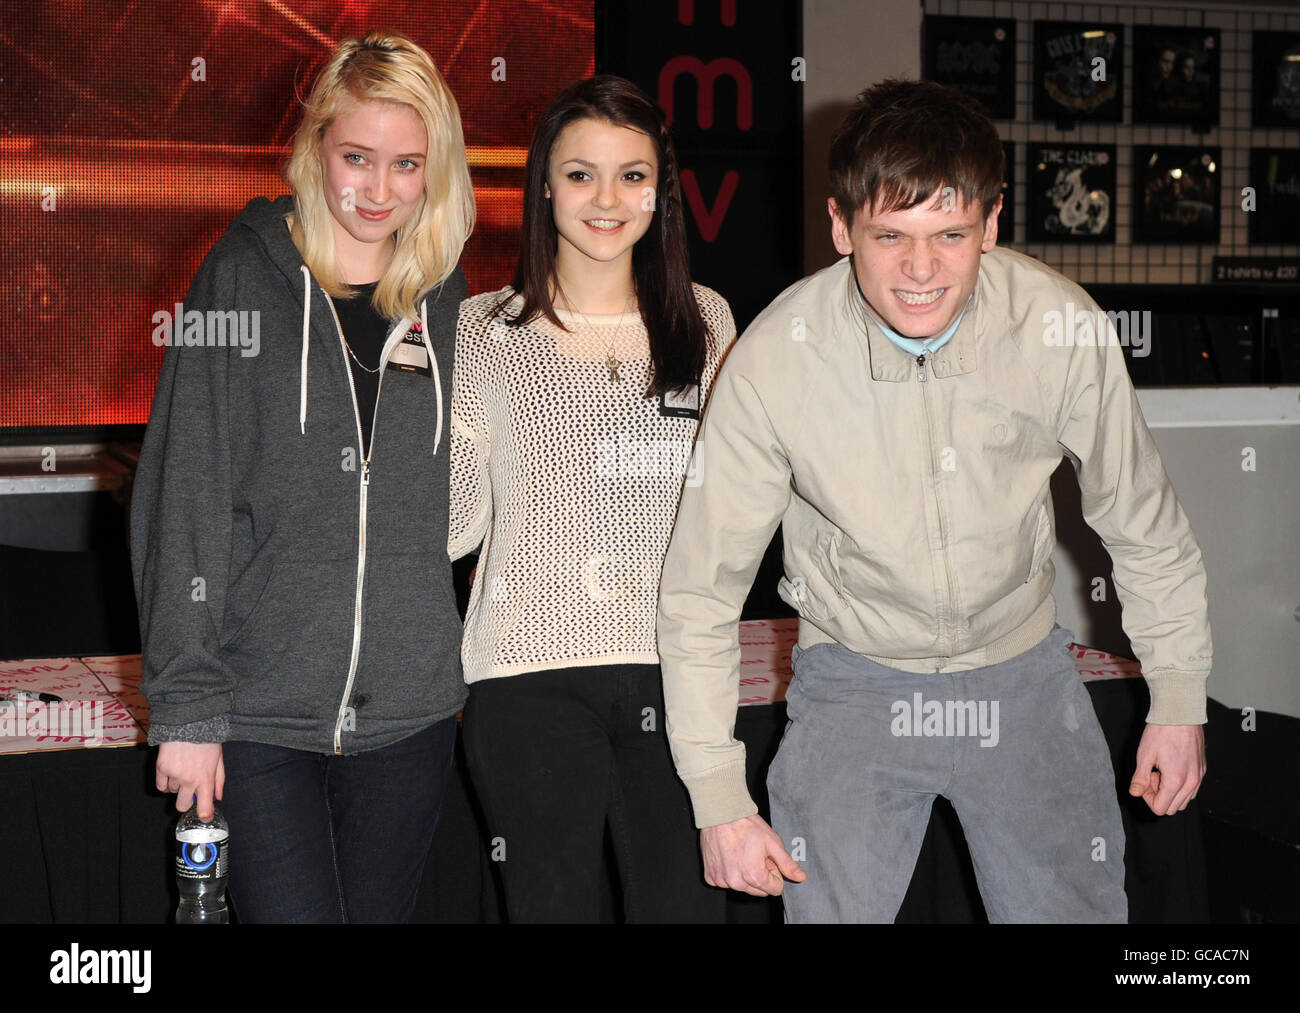 (From left to right) Lily Loveless, who plays Naomi Campbell, Kathryn Prescott, who plays Emily Fitch and Jack O'Connell, who plays James Cook in TV drama Skins, during a Skins book signing at HMV Oxford Street in central London. Stock Photo